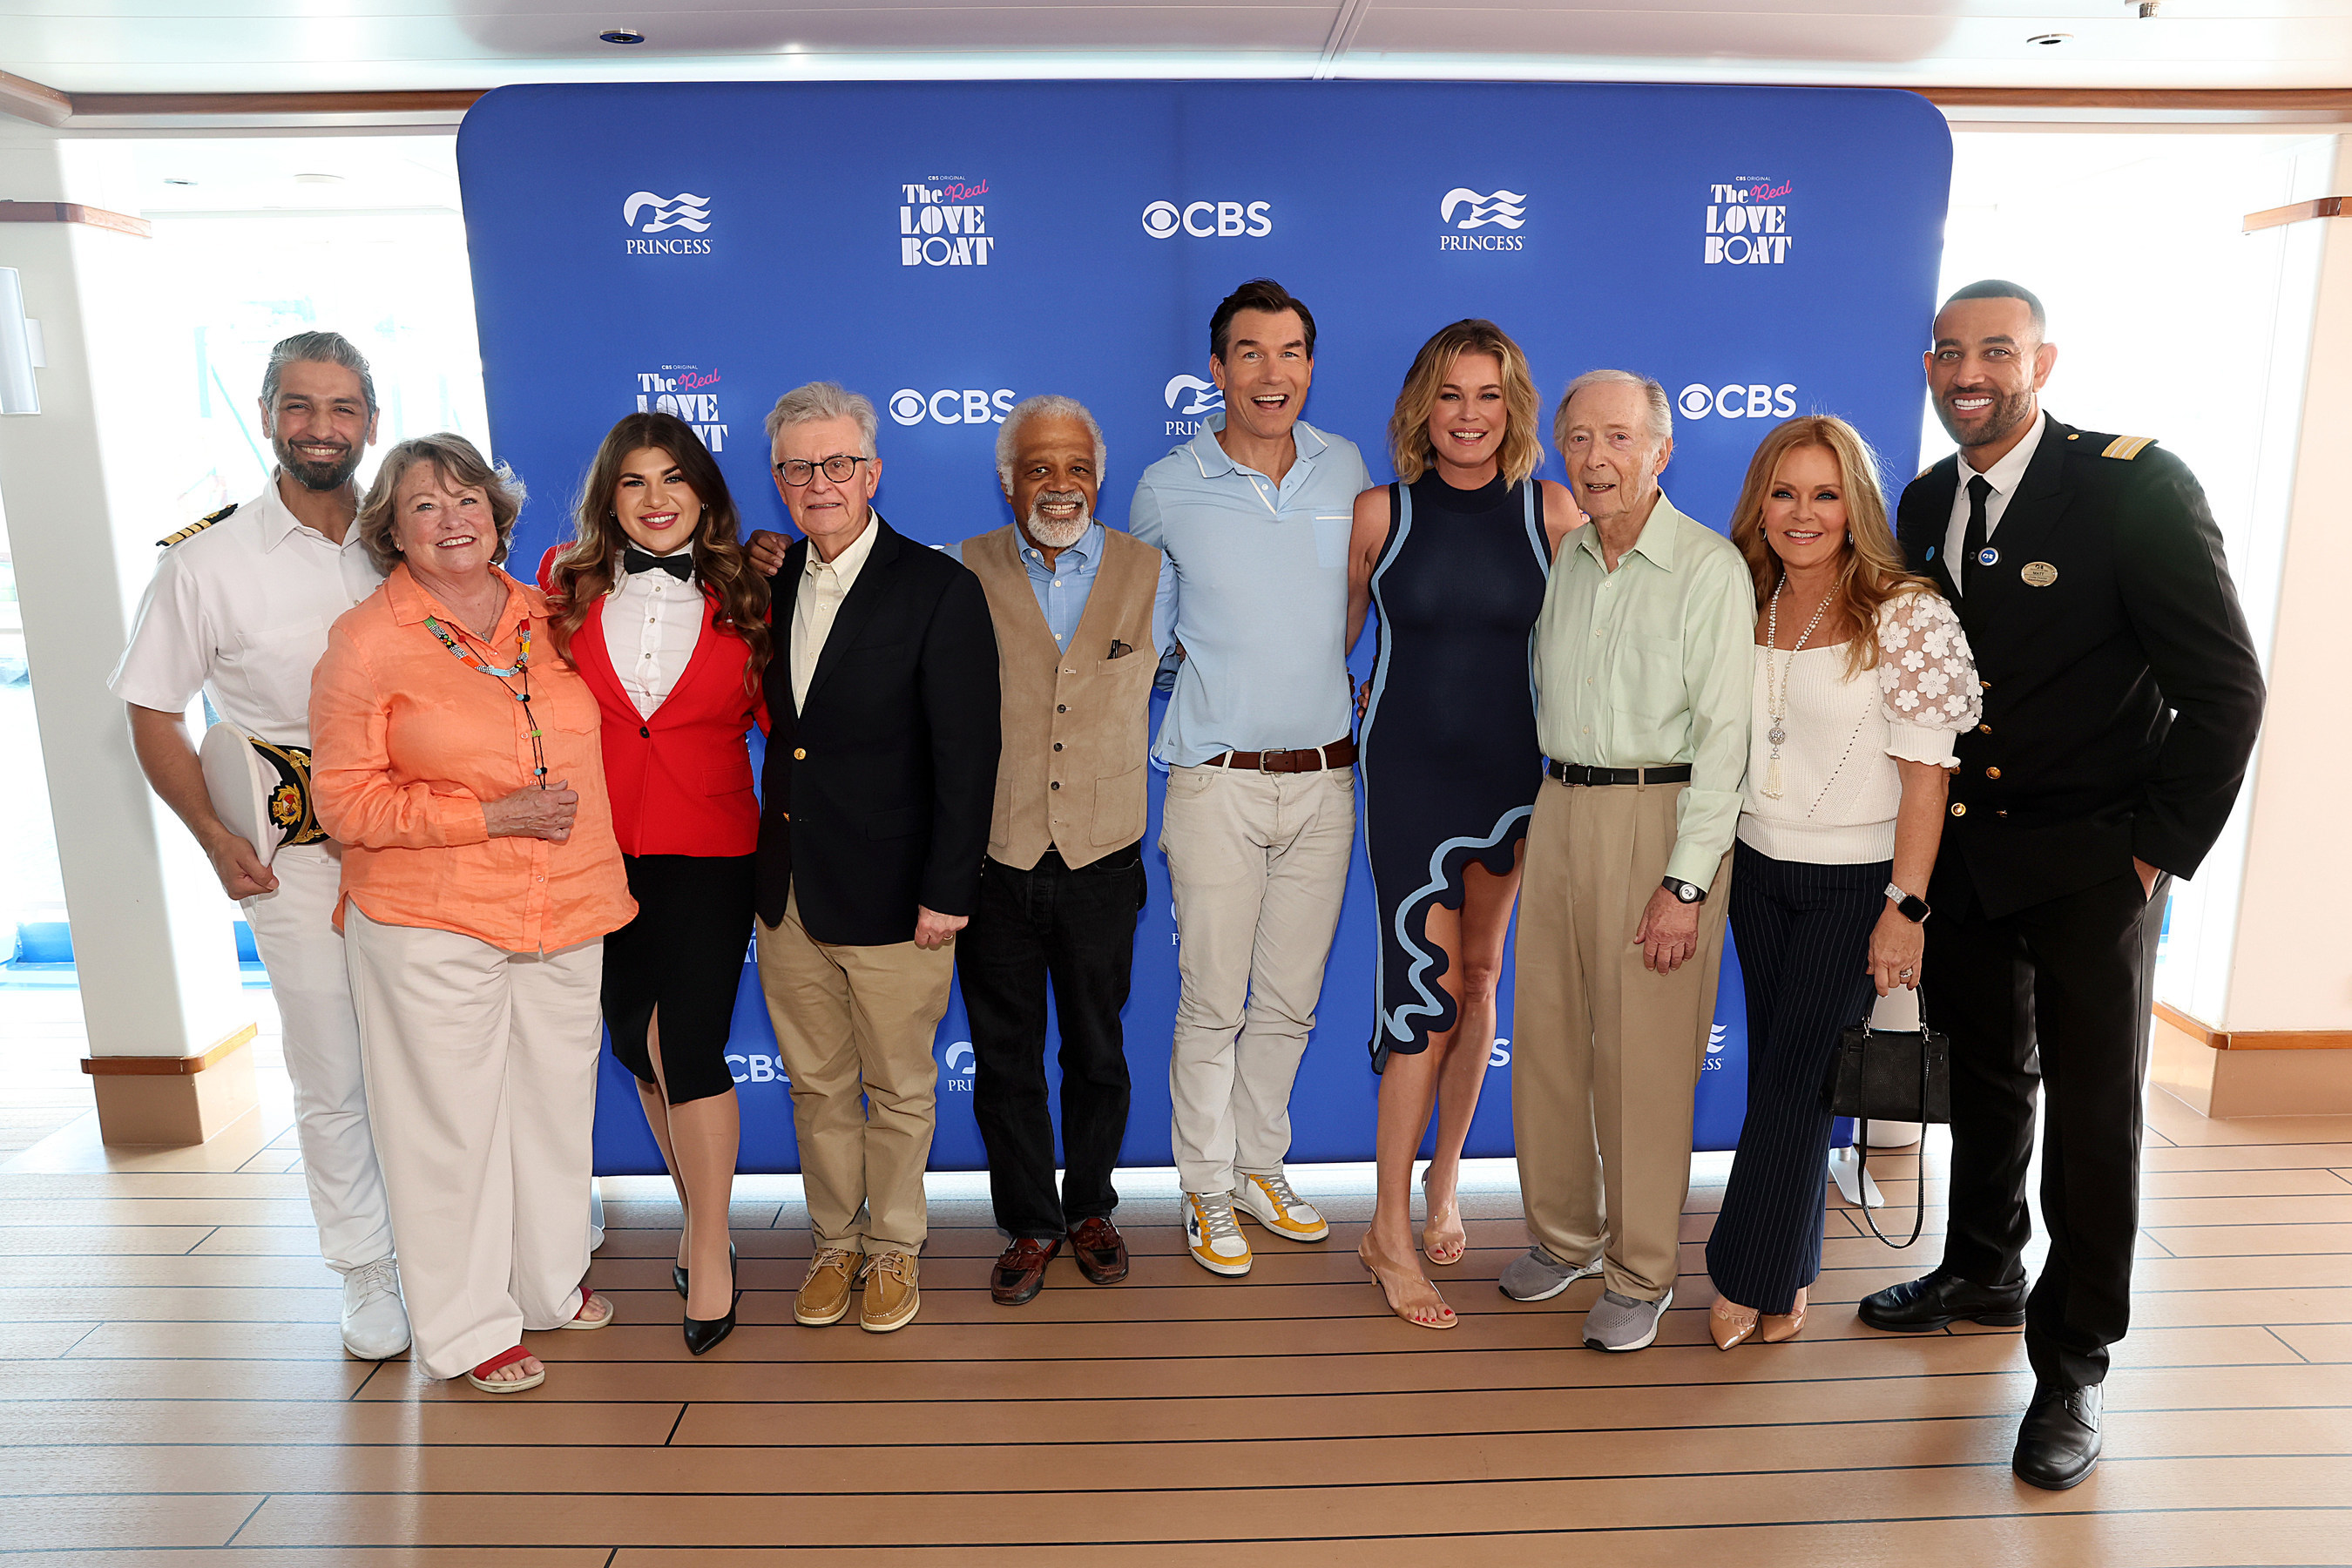 The Original Cast of “The Love Boat” meets “The Real Love Boat” hosts and crew onboard Discovery Princess at the Port of Los Angeles (Image at LateCruiseNews.com - October 2022)